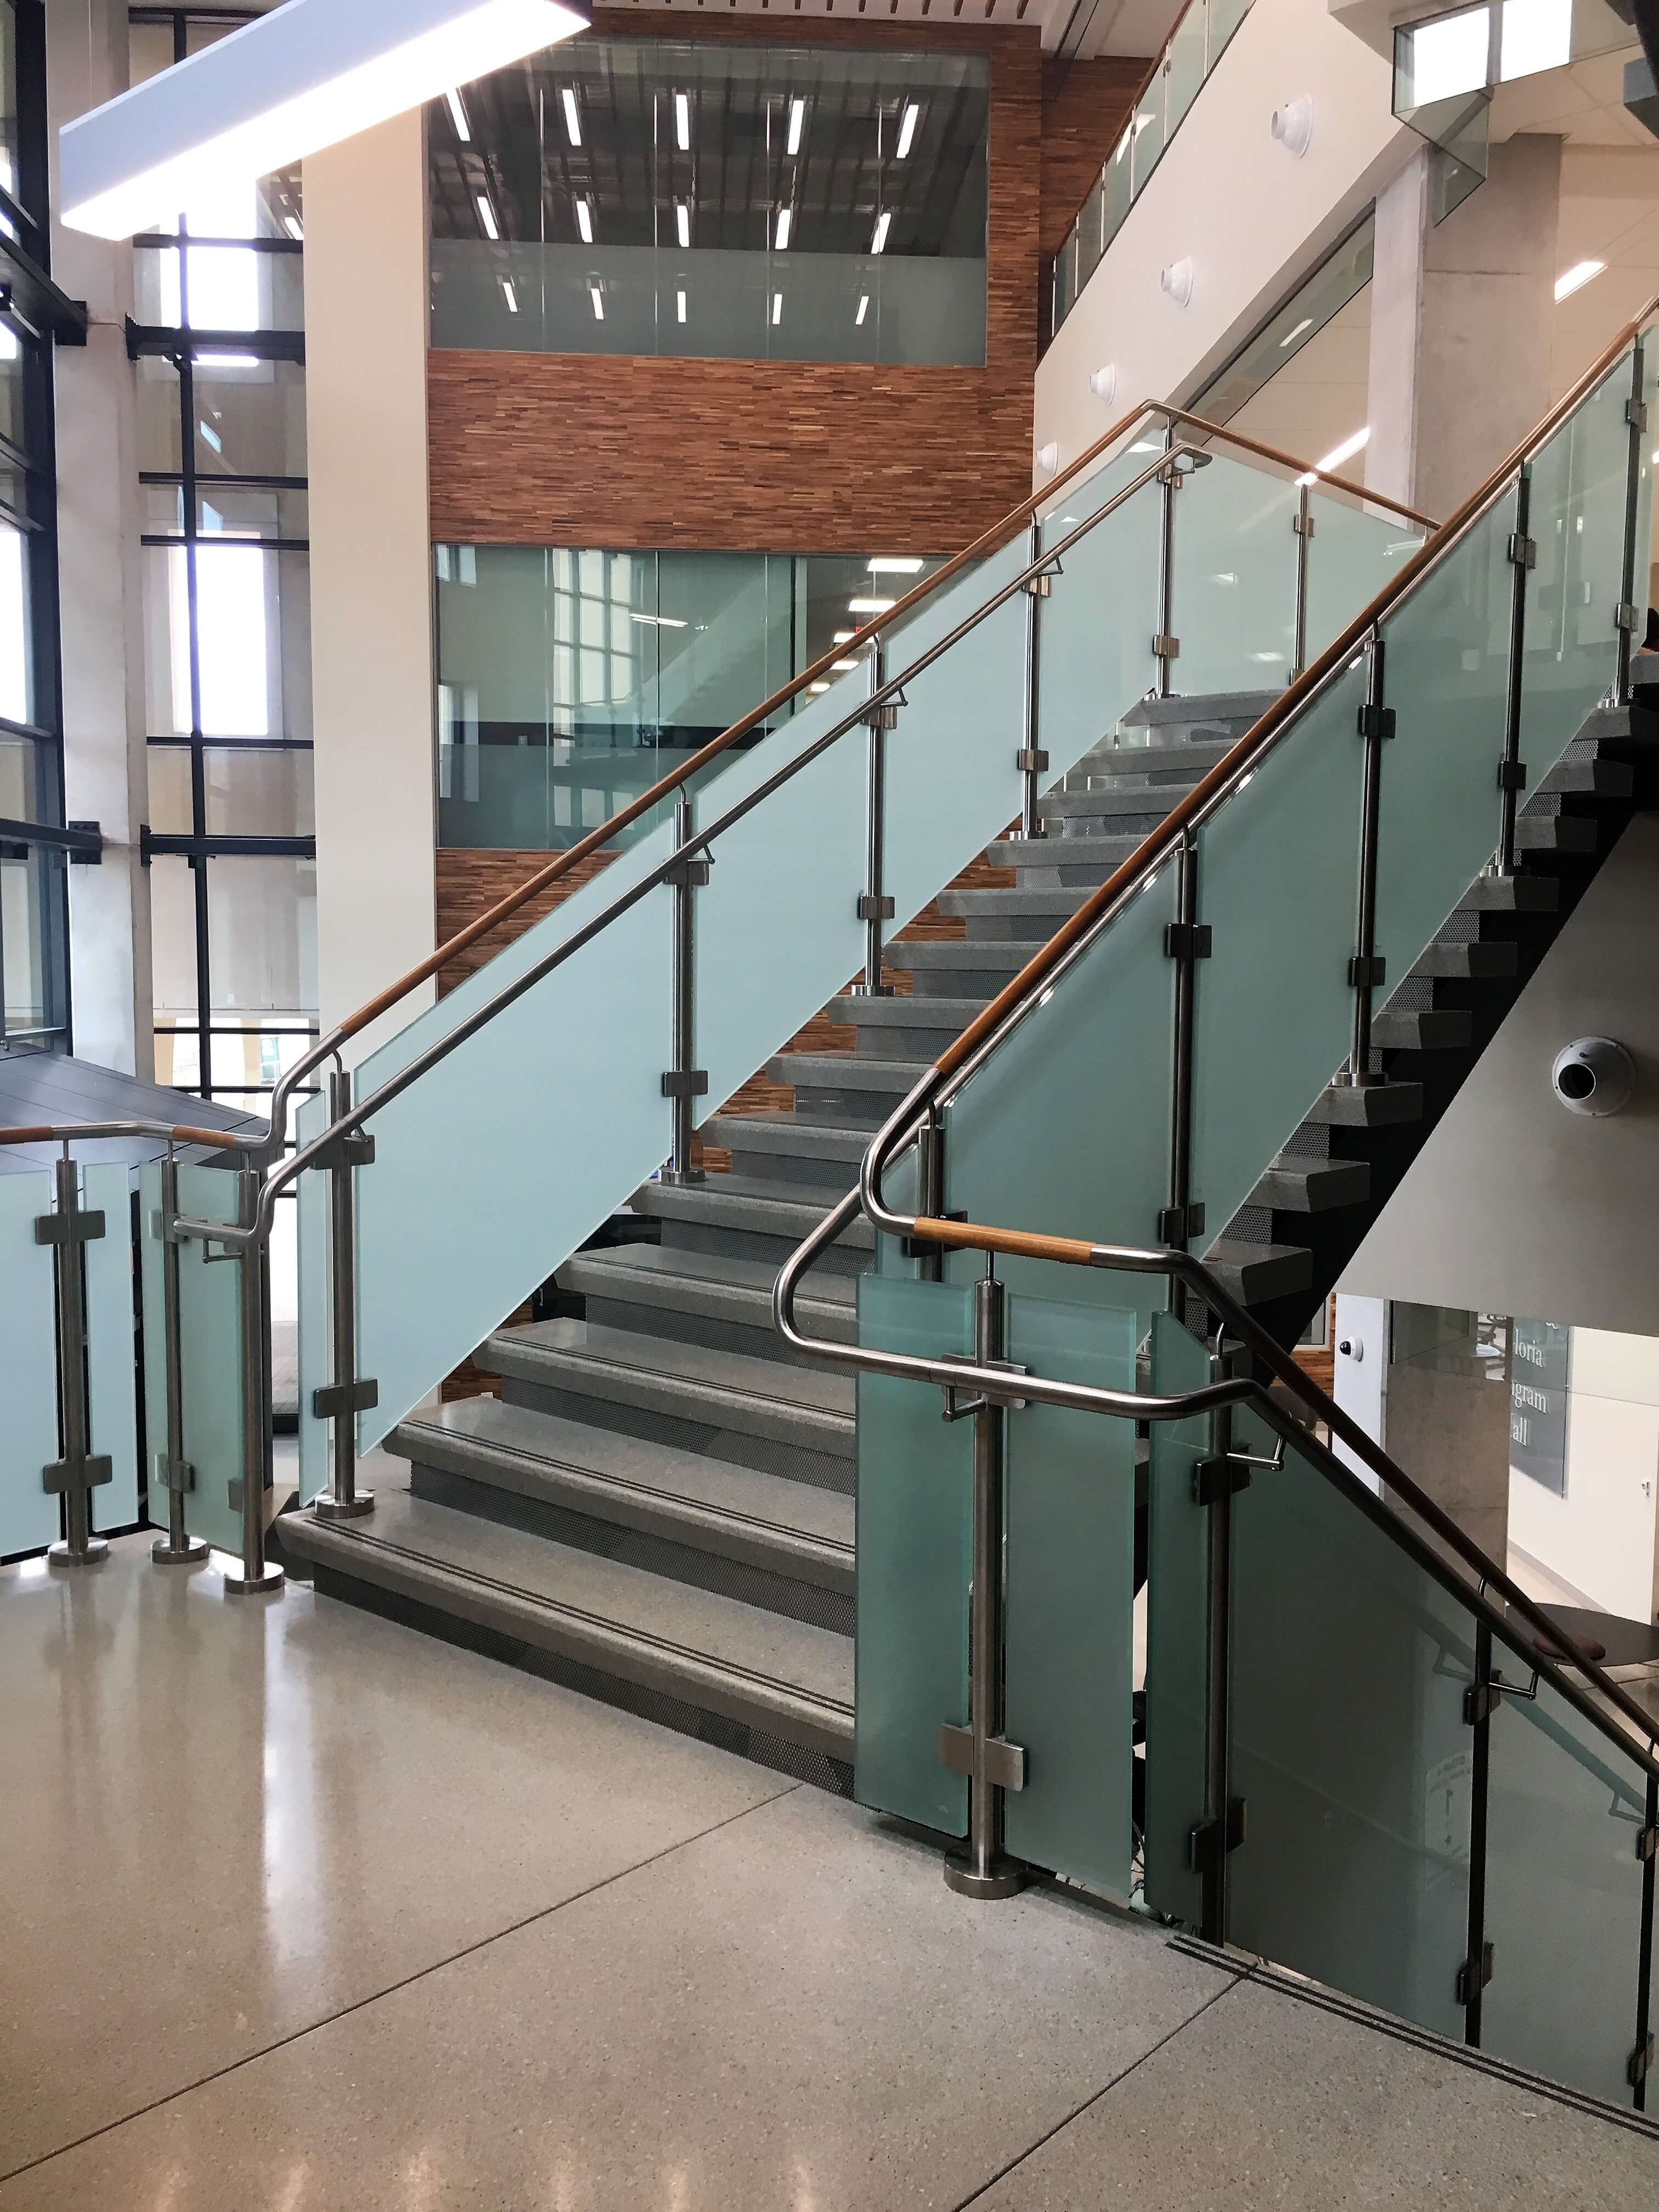 Circum guardrail installation with wood handrail and frosted glass infill at Texas State University, TX.